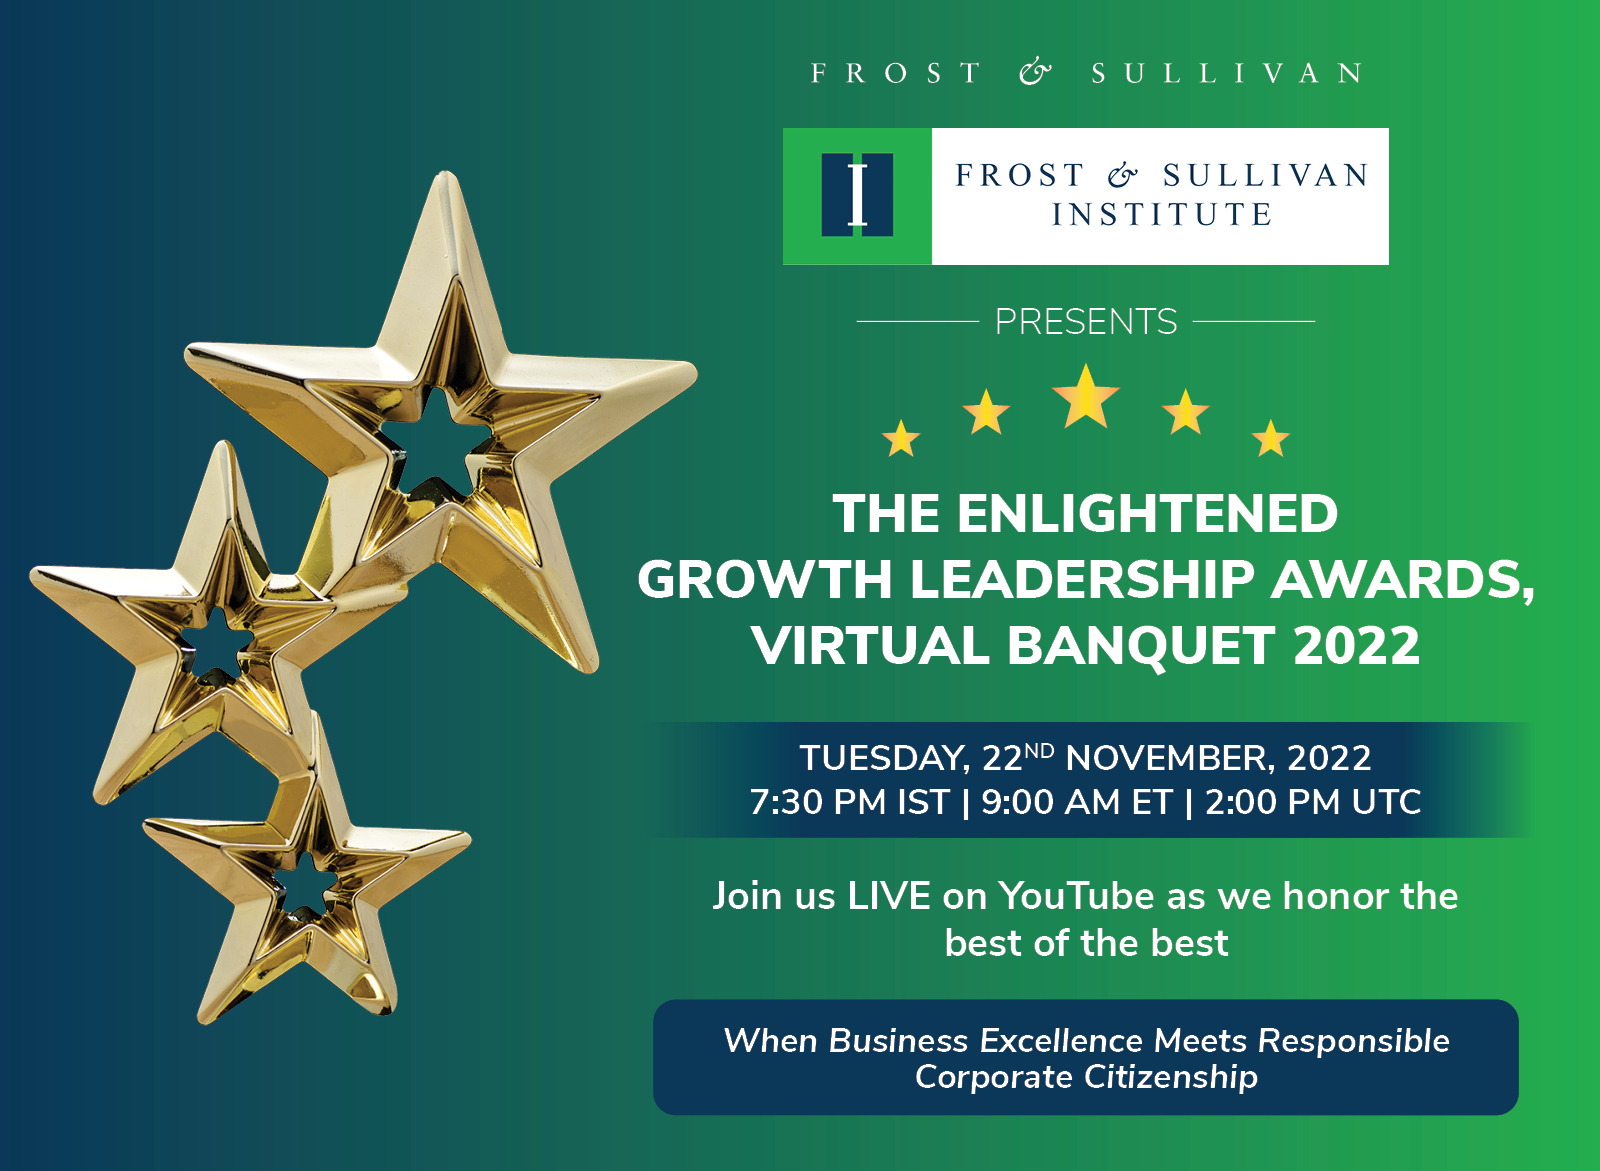 THE ENLIGHTENED GROWTH LEADERSHIP AWARDS, VIRTUAL BANQUET 2022